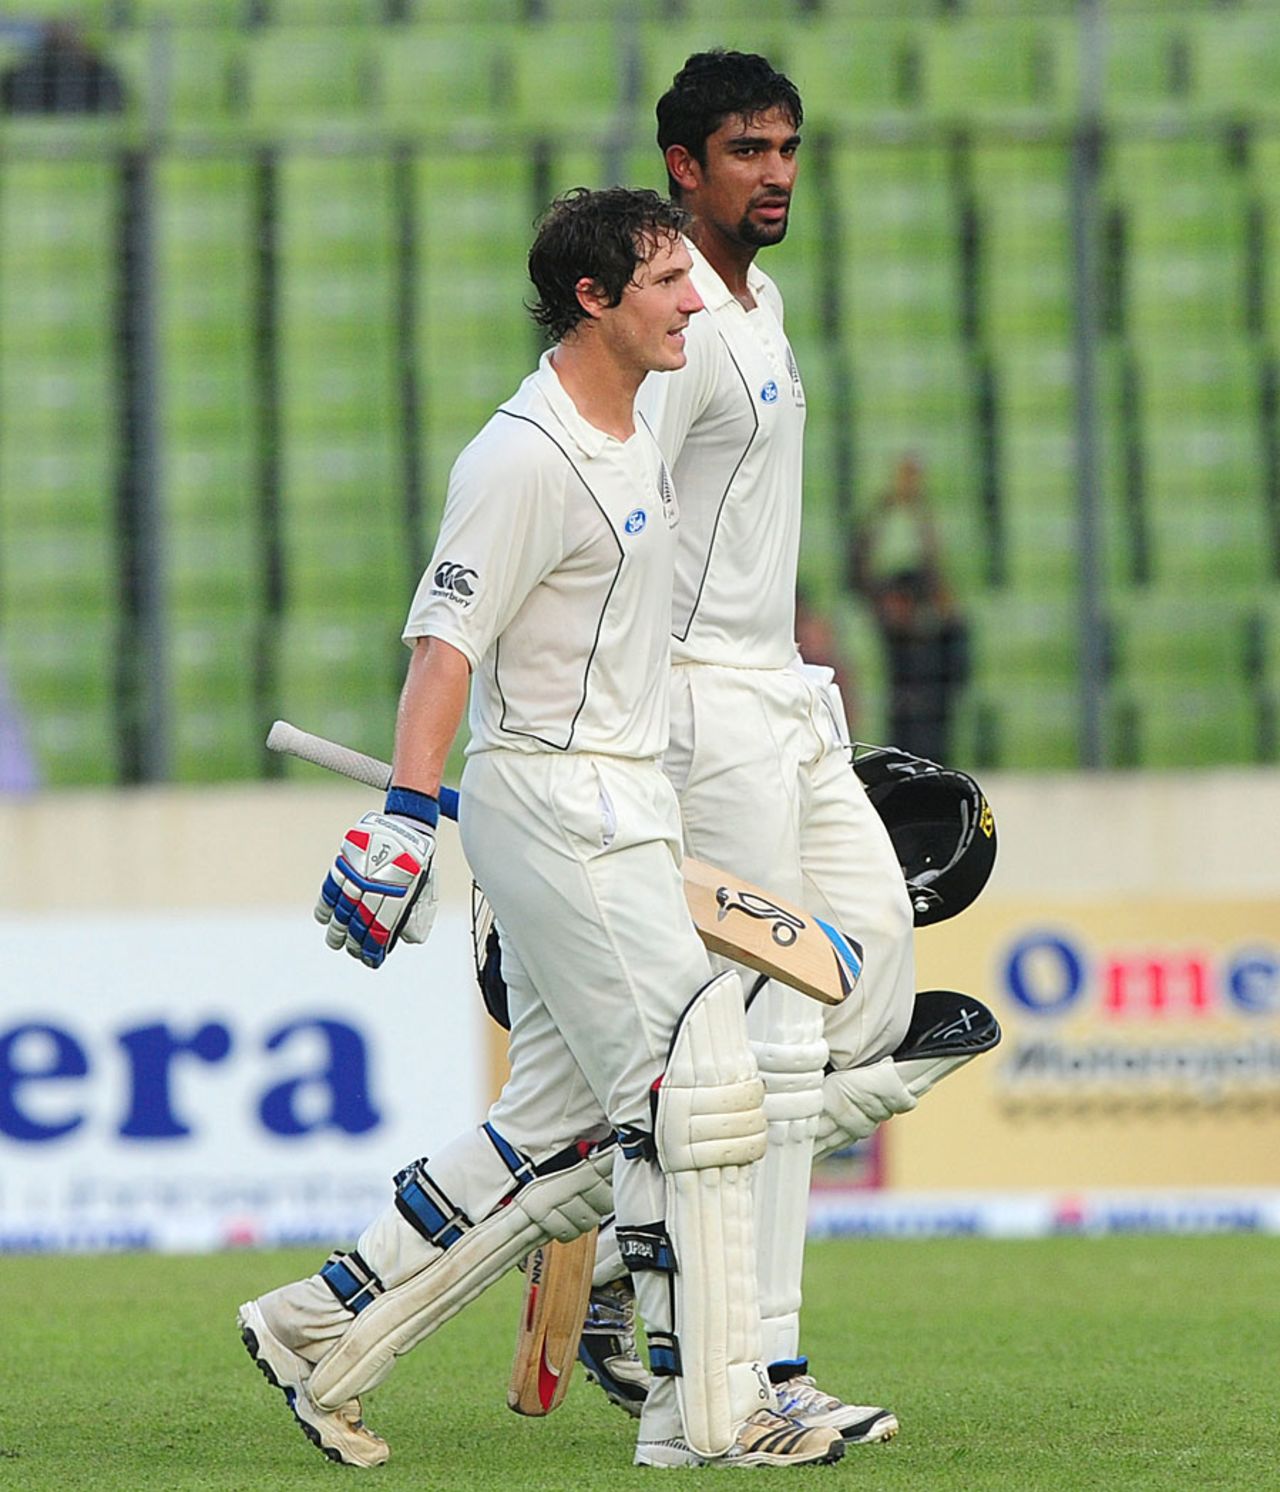 Ish Sodhi and BJ Watling made unbeaten 50s at the end of the third day, Bangladesh v New Zealand, 2nd Test, 3rd day, Mirpur, October 23, 2013